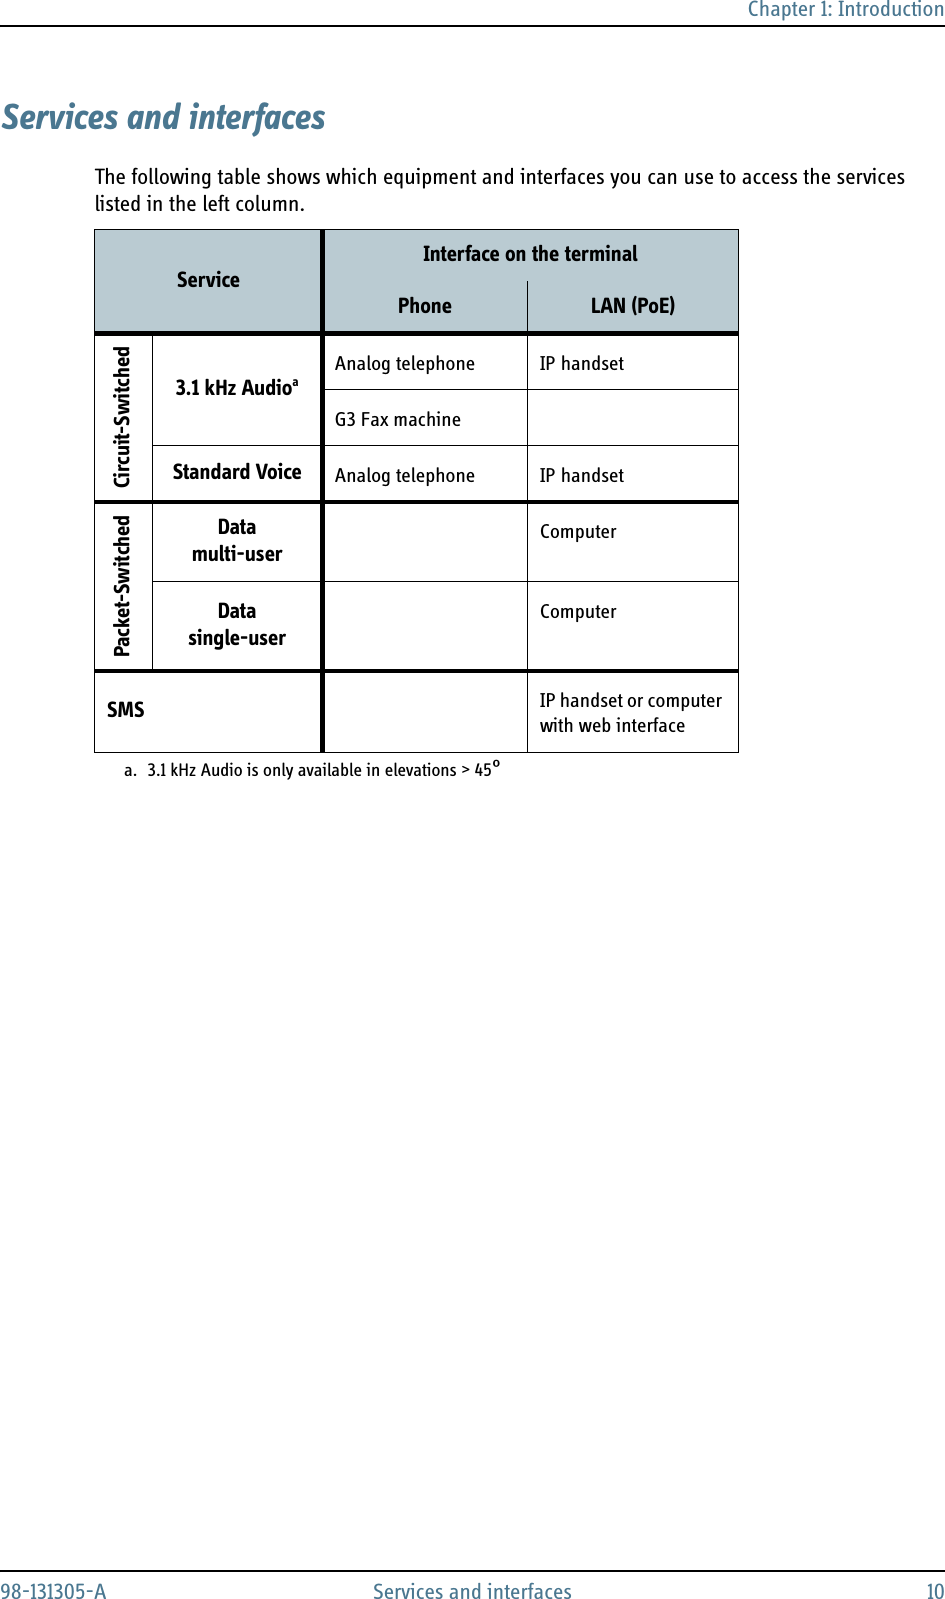 Chapter 1: Introduction98-131305-A Services and interfaces 10Services and interfacesThe following table shows which equipment and interfaces you can use to access the services listed in the left column.ServiceInterface on the terminalPhone LAN (PoE)Circuit-Switched3.1 kHz Audioaa. 3.1 kHz Audio is only available in elevations &gt; 45°Analog telephone IP handsetG3 Fax machineStandard Voice Analog telephone IP handsetPacket-SwitchedDatamulti-userComputerDatasingle-userComputerSMS IP handset or computer with web interface